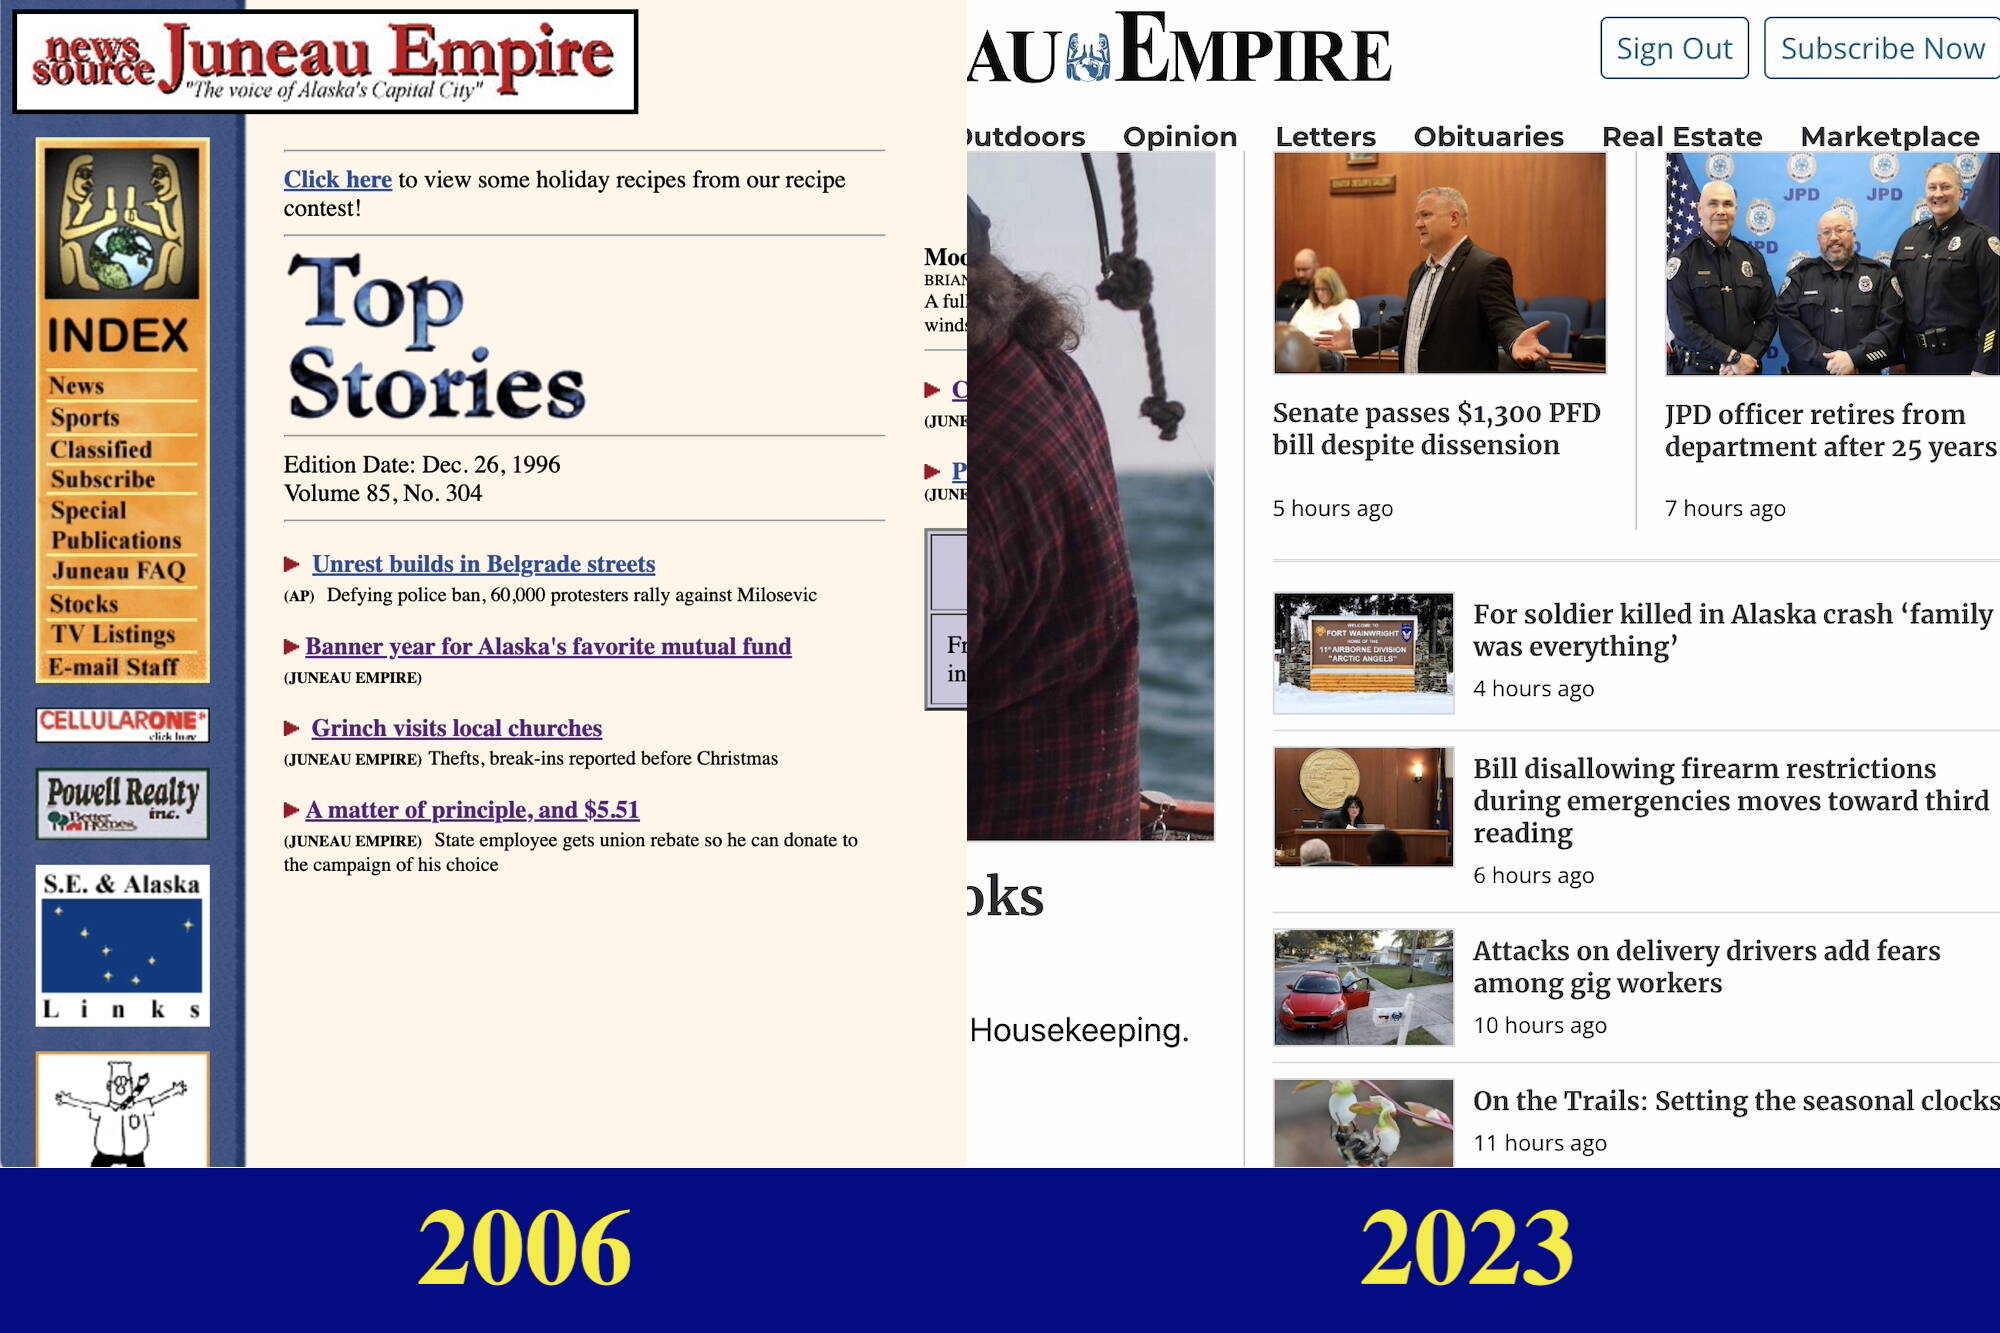 Screenshot
Screenshots of the Juneau Empire’s website in 1996 and today.